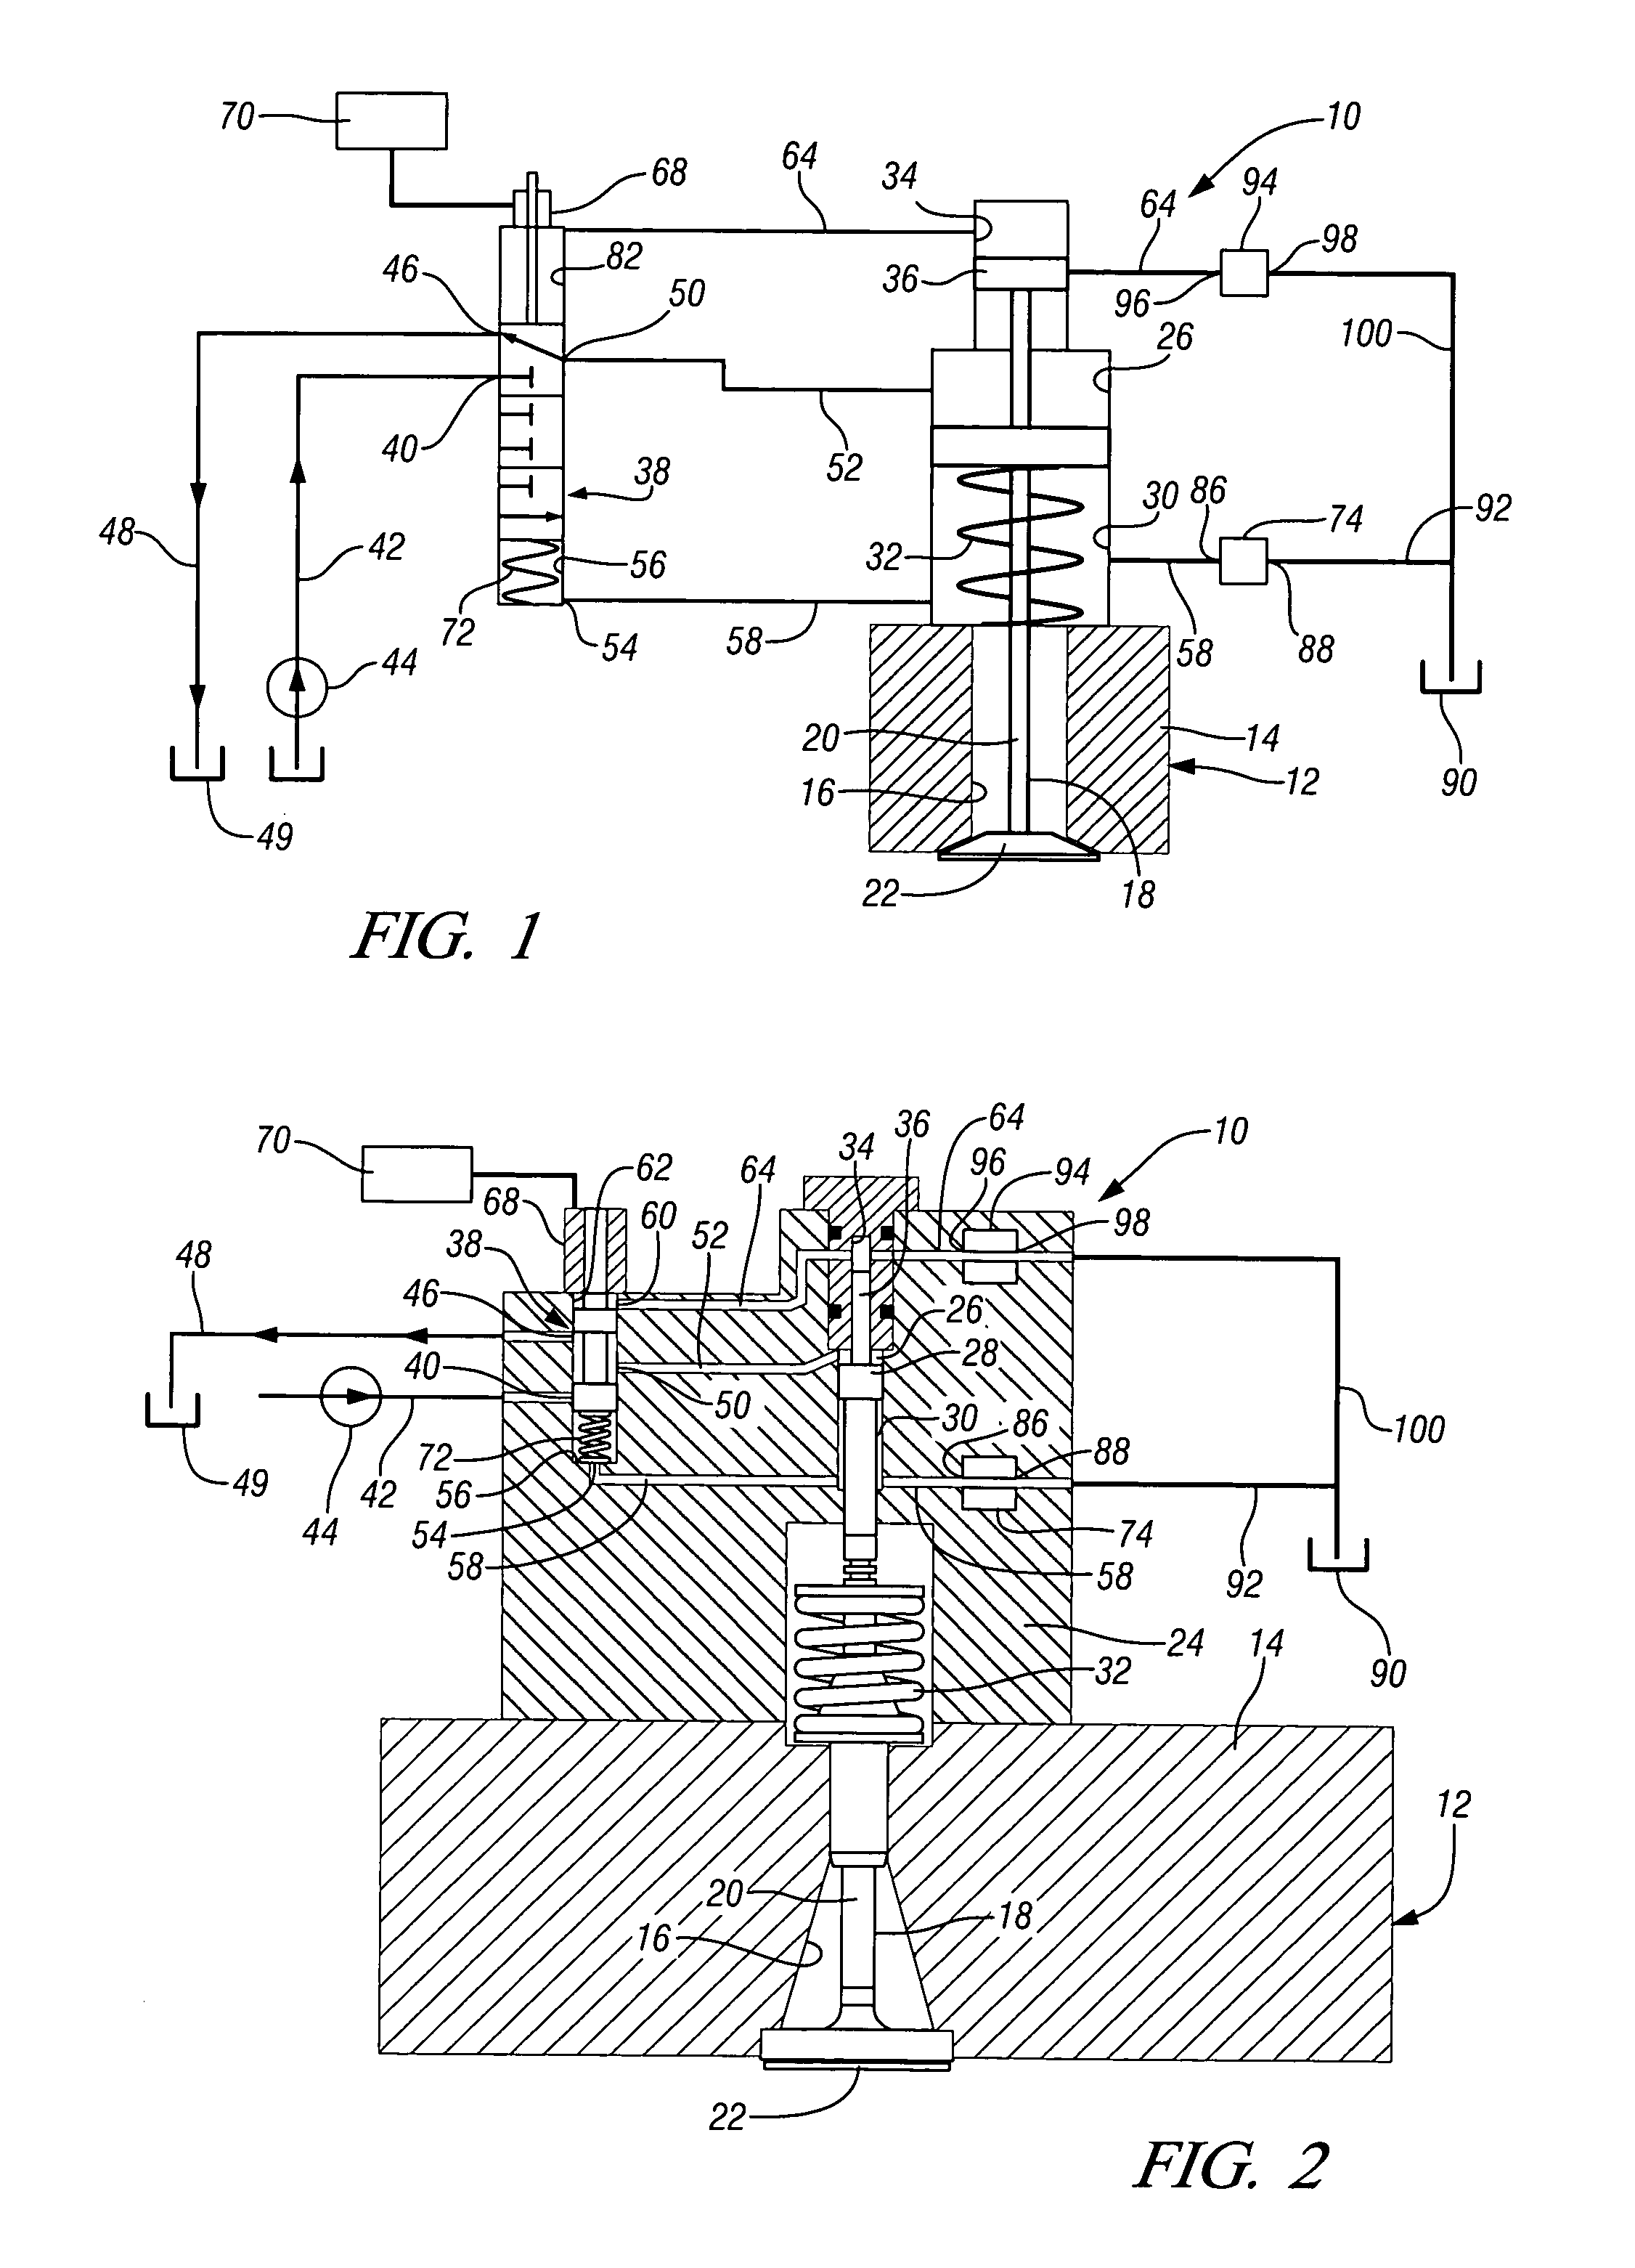 Electrohydraulic valve actuator assembly